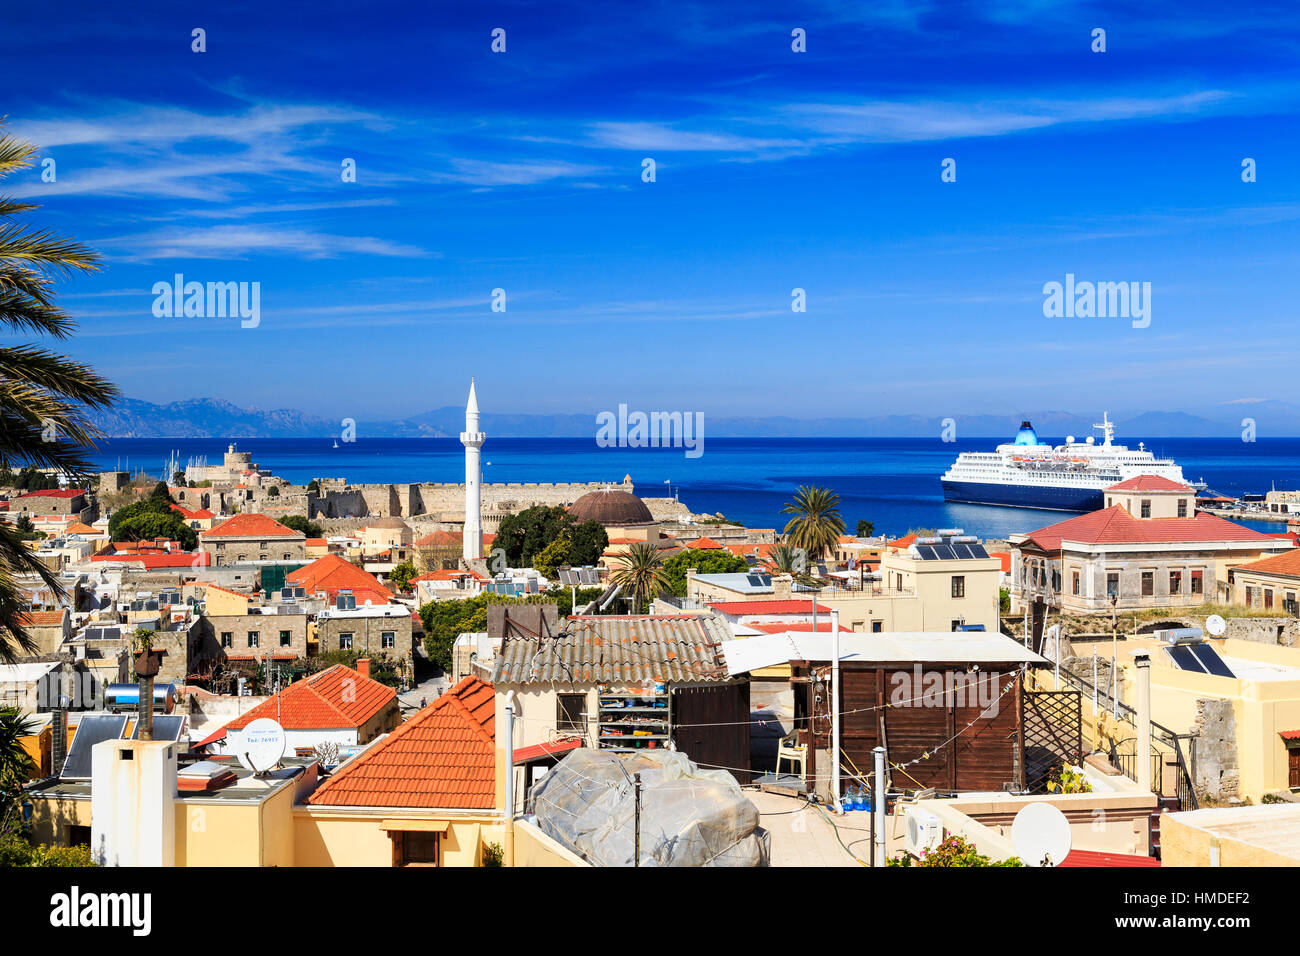 View over Rhodes old town down to mandraki harbour showing rooftops, minarets and the old walls Stock Photo